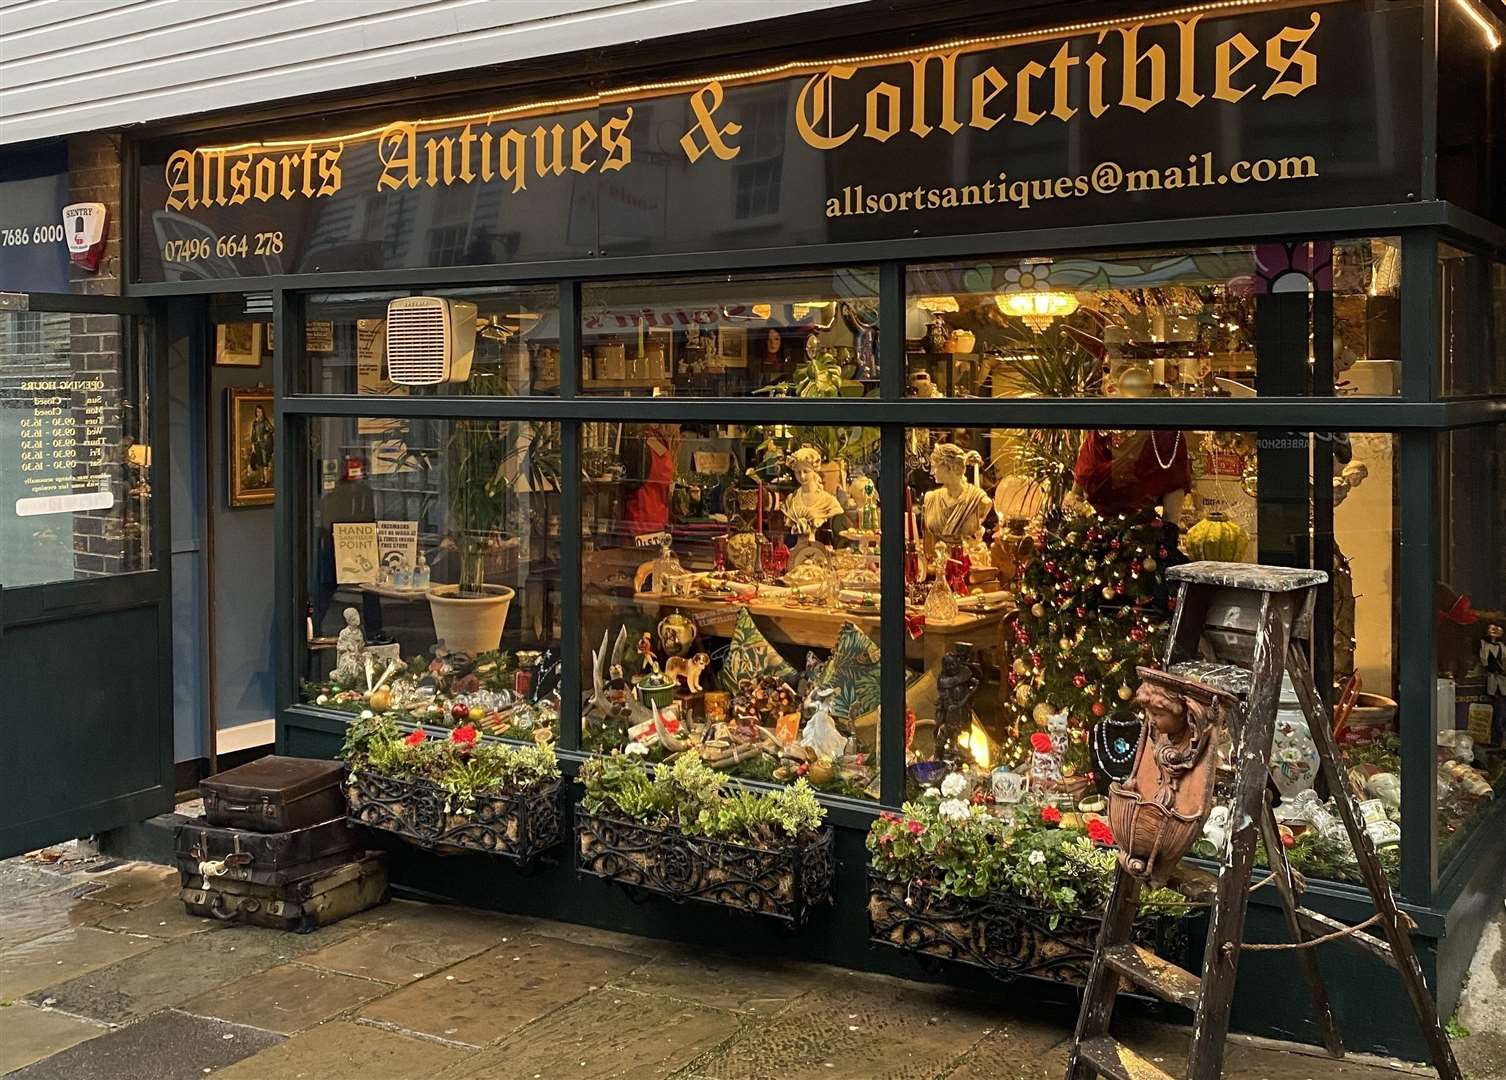 Allsorts Antiques & Collectibles